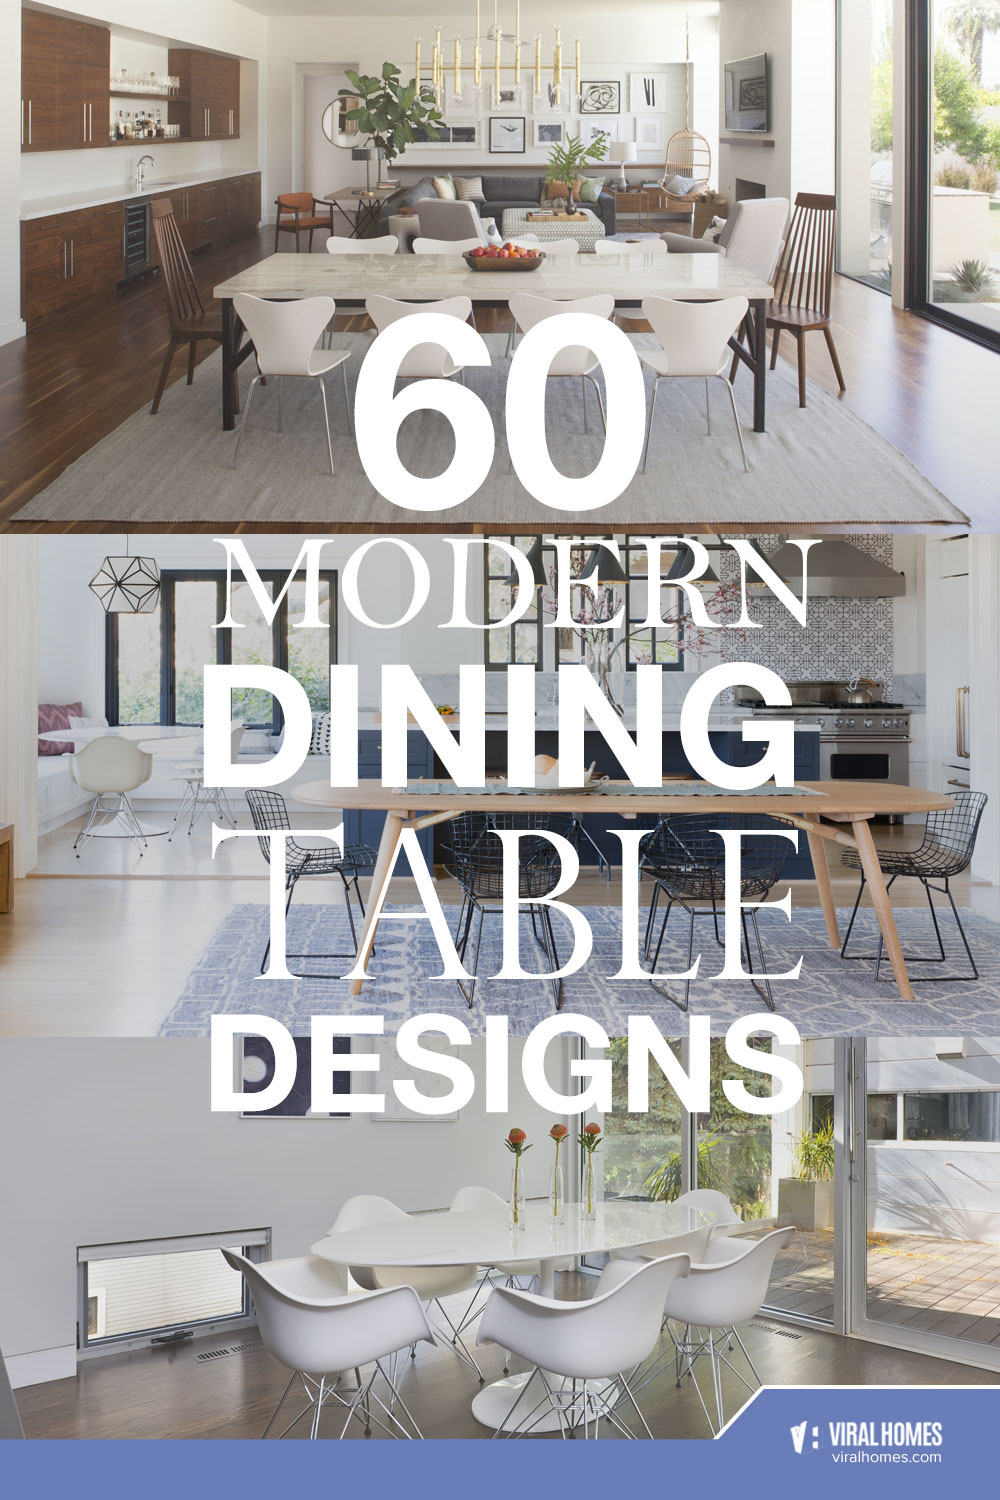 Awesome Modern Dining Table Designs You'll Want for Your Home